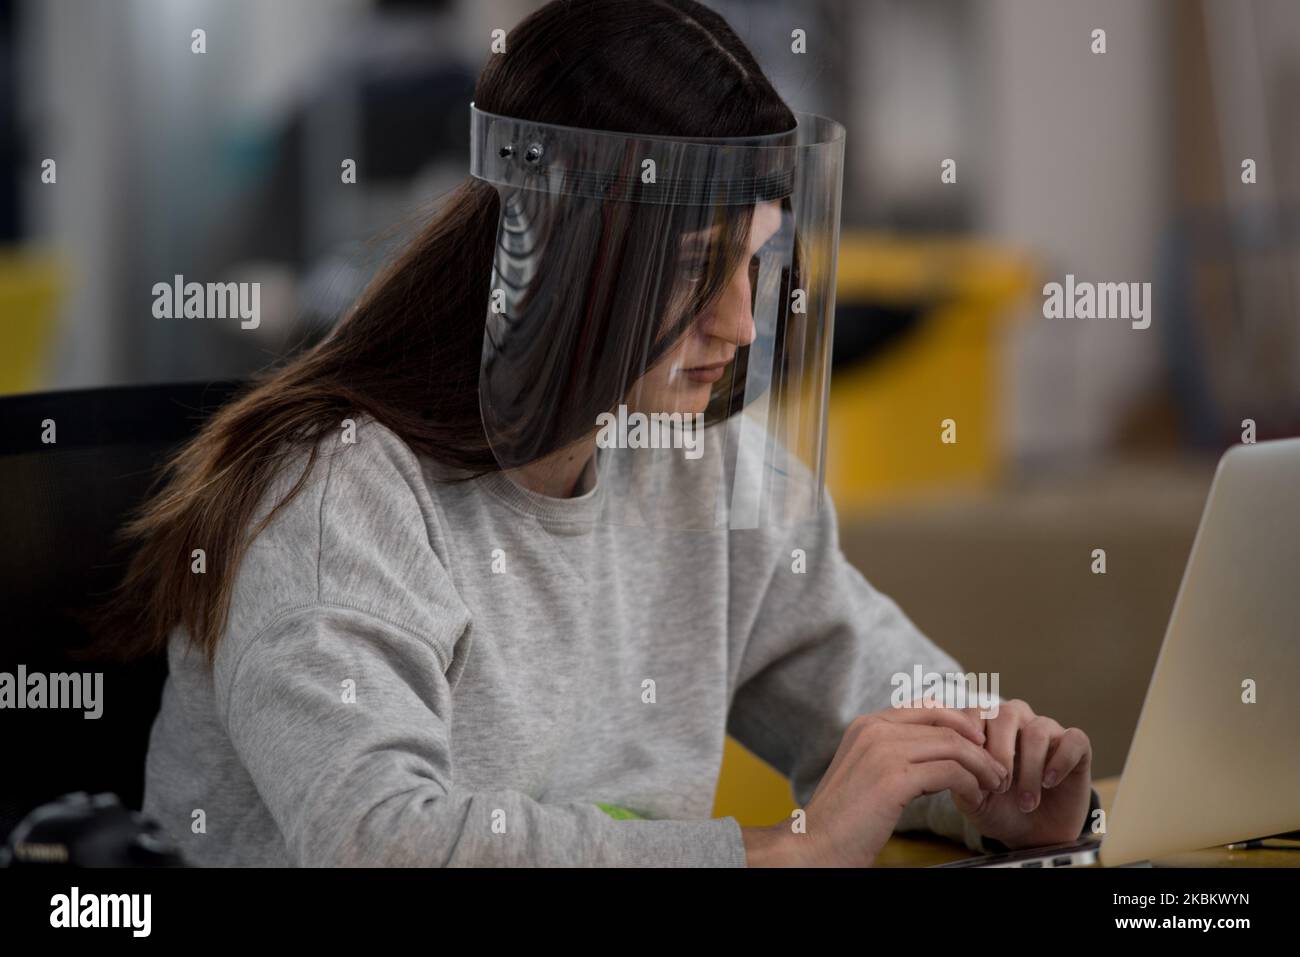 Francesca Moretti, daughter of the founder of the World's Advanced Saving Project, is wearing one of the protective devices designed and produced during the coronavirus crisis. Massa Lombarda, Italy, March 31, 2020. (Photo by Andrea Neri/NurPhoto) Stock Photo